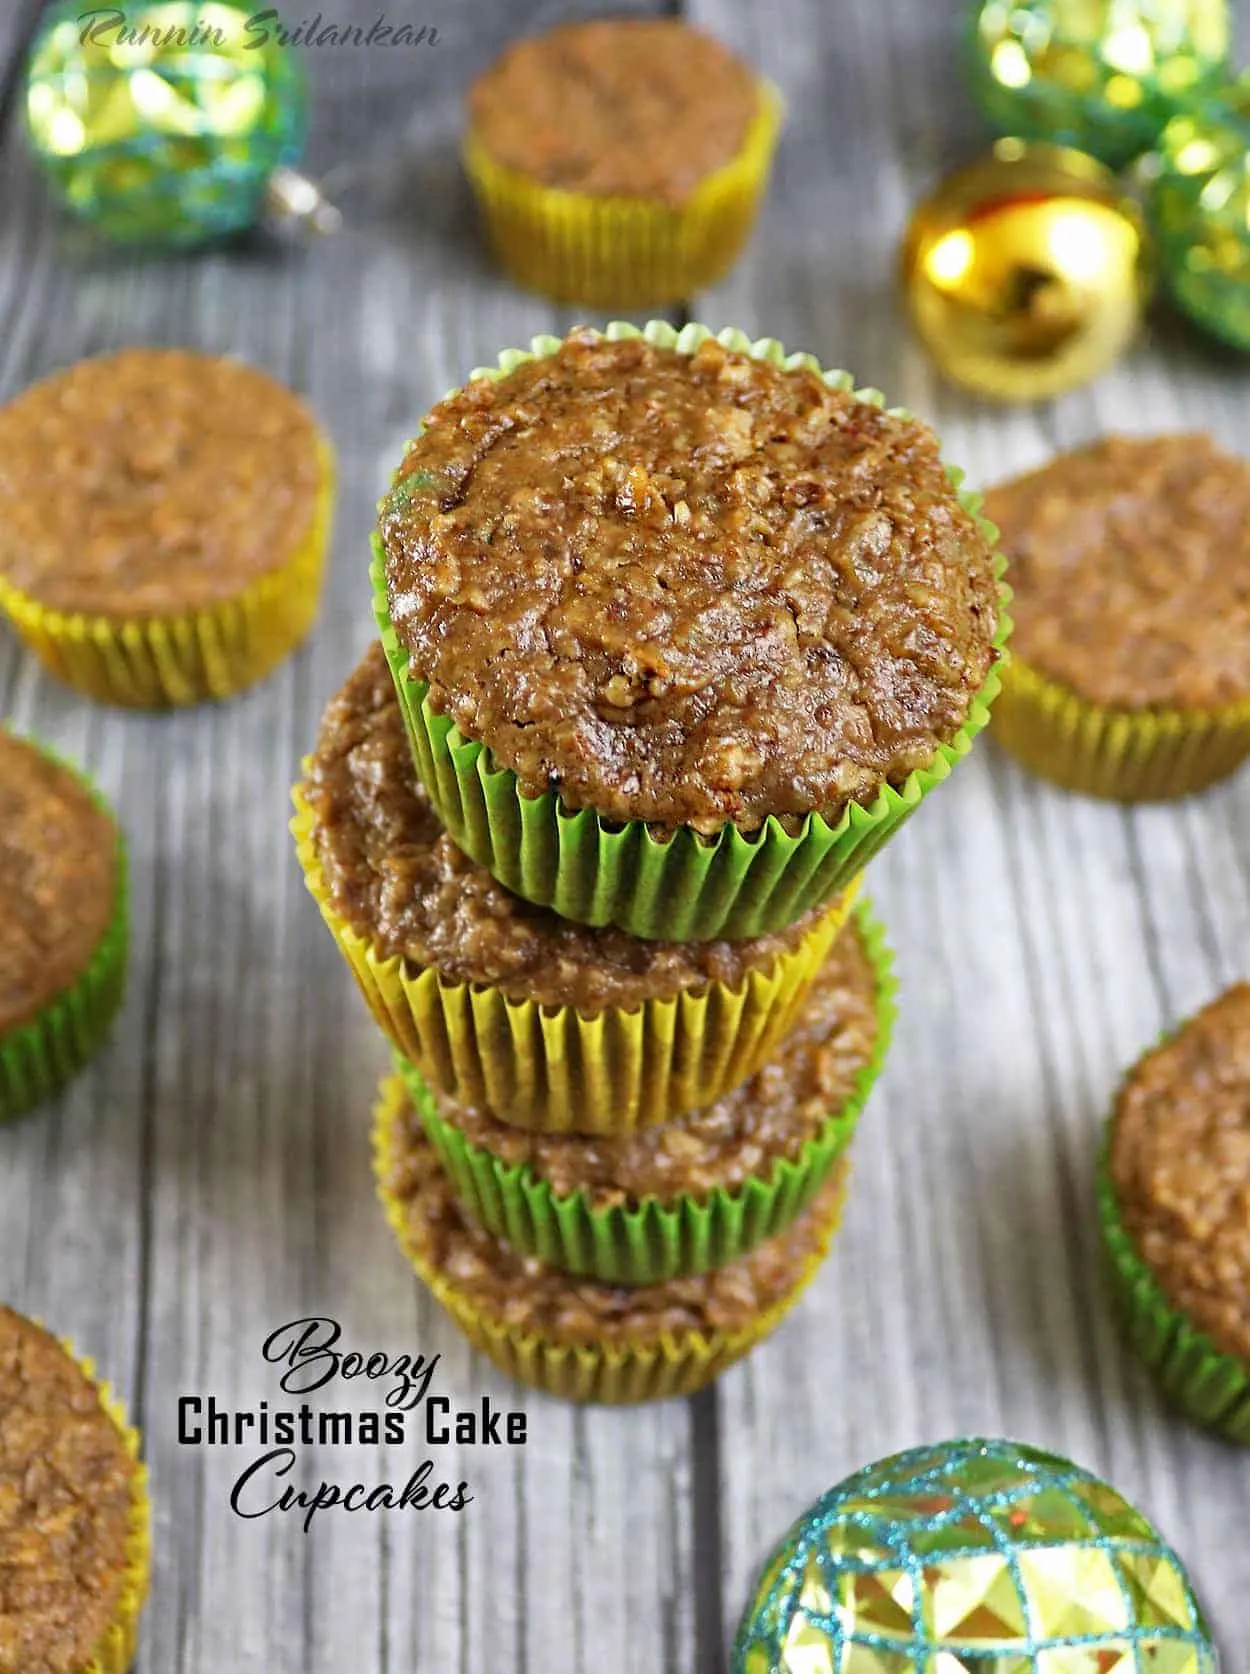 Filled with brandy-soaked dried fruits and nuts, these dense and decadent, Boozy Christmas Cake Cupcakes are an adapted version of the Sri Lankan Christmas Cake of my youth.